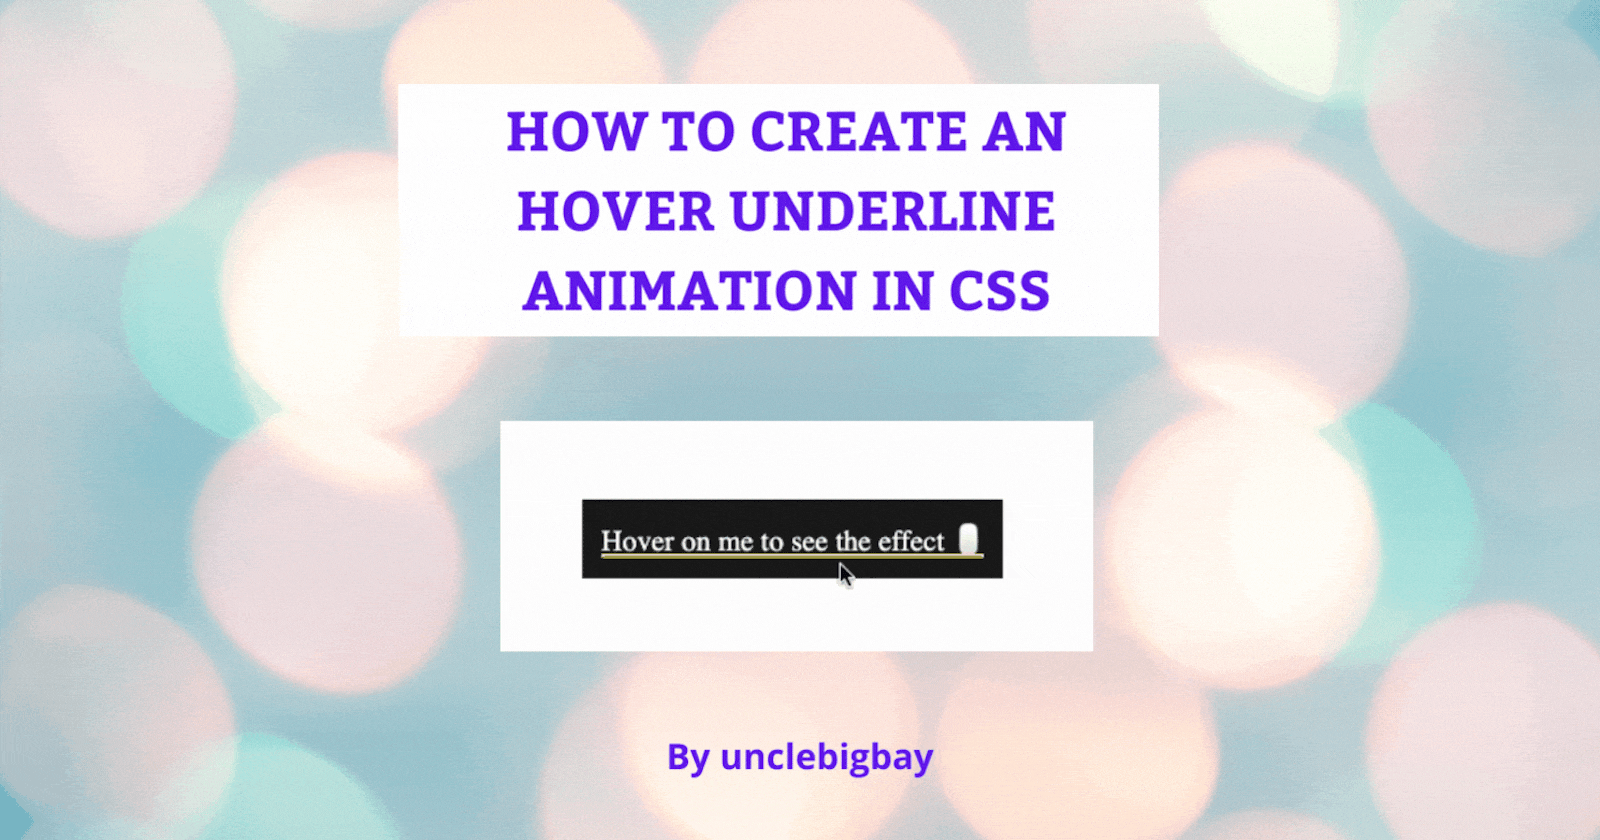 How To Create An Hover Underline Animation In CSS